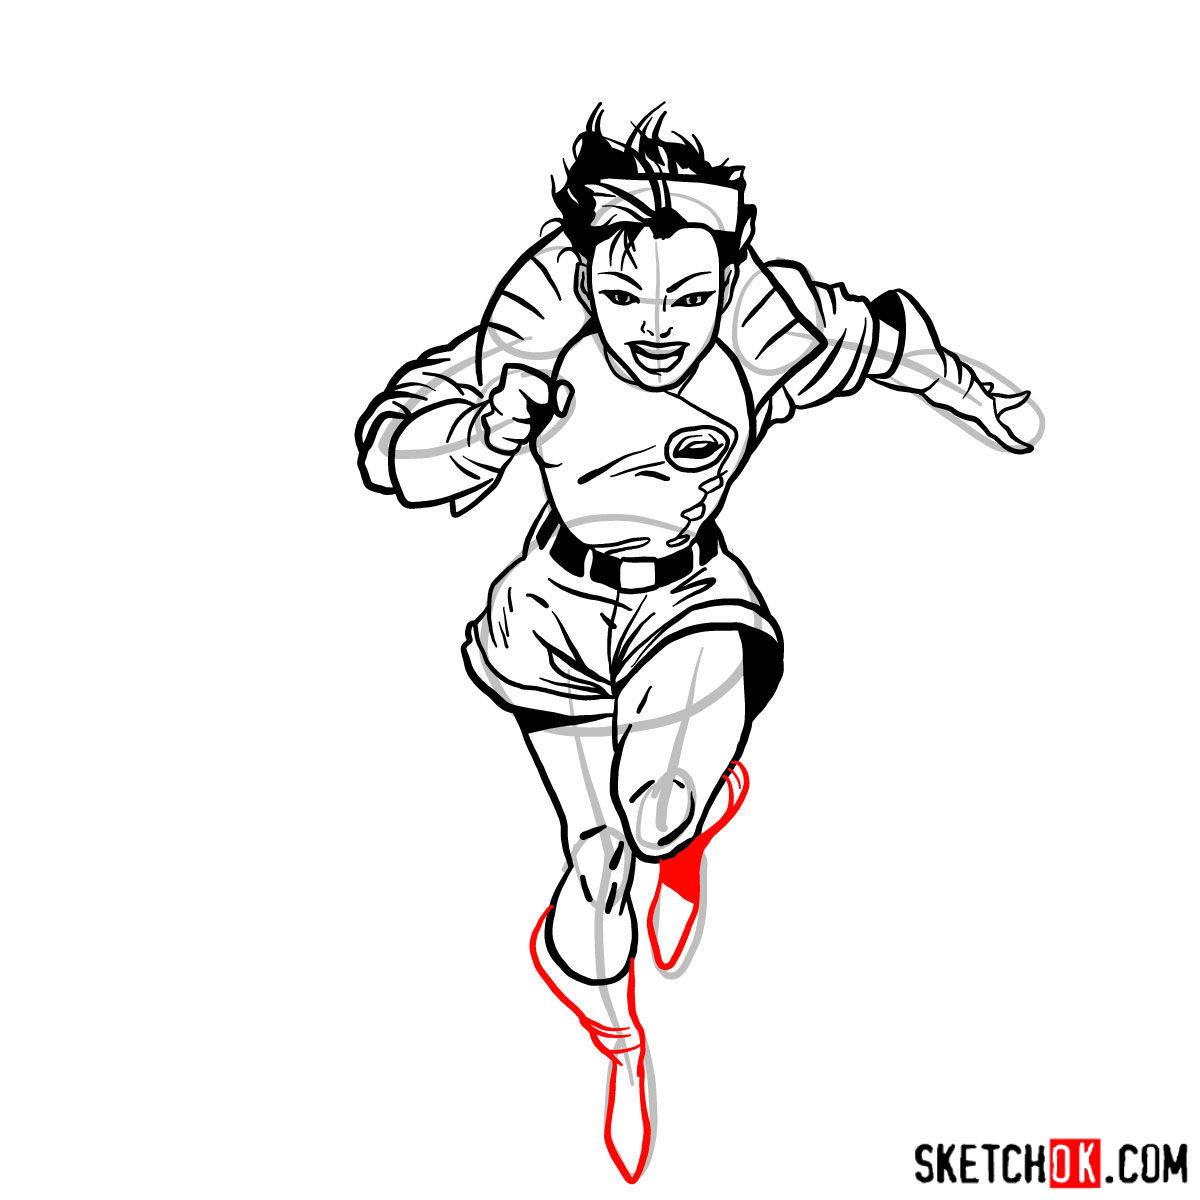 How to draw Jubilee mutant from X-Men series - step 13